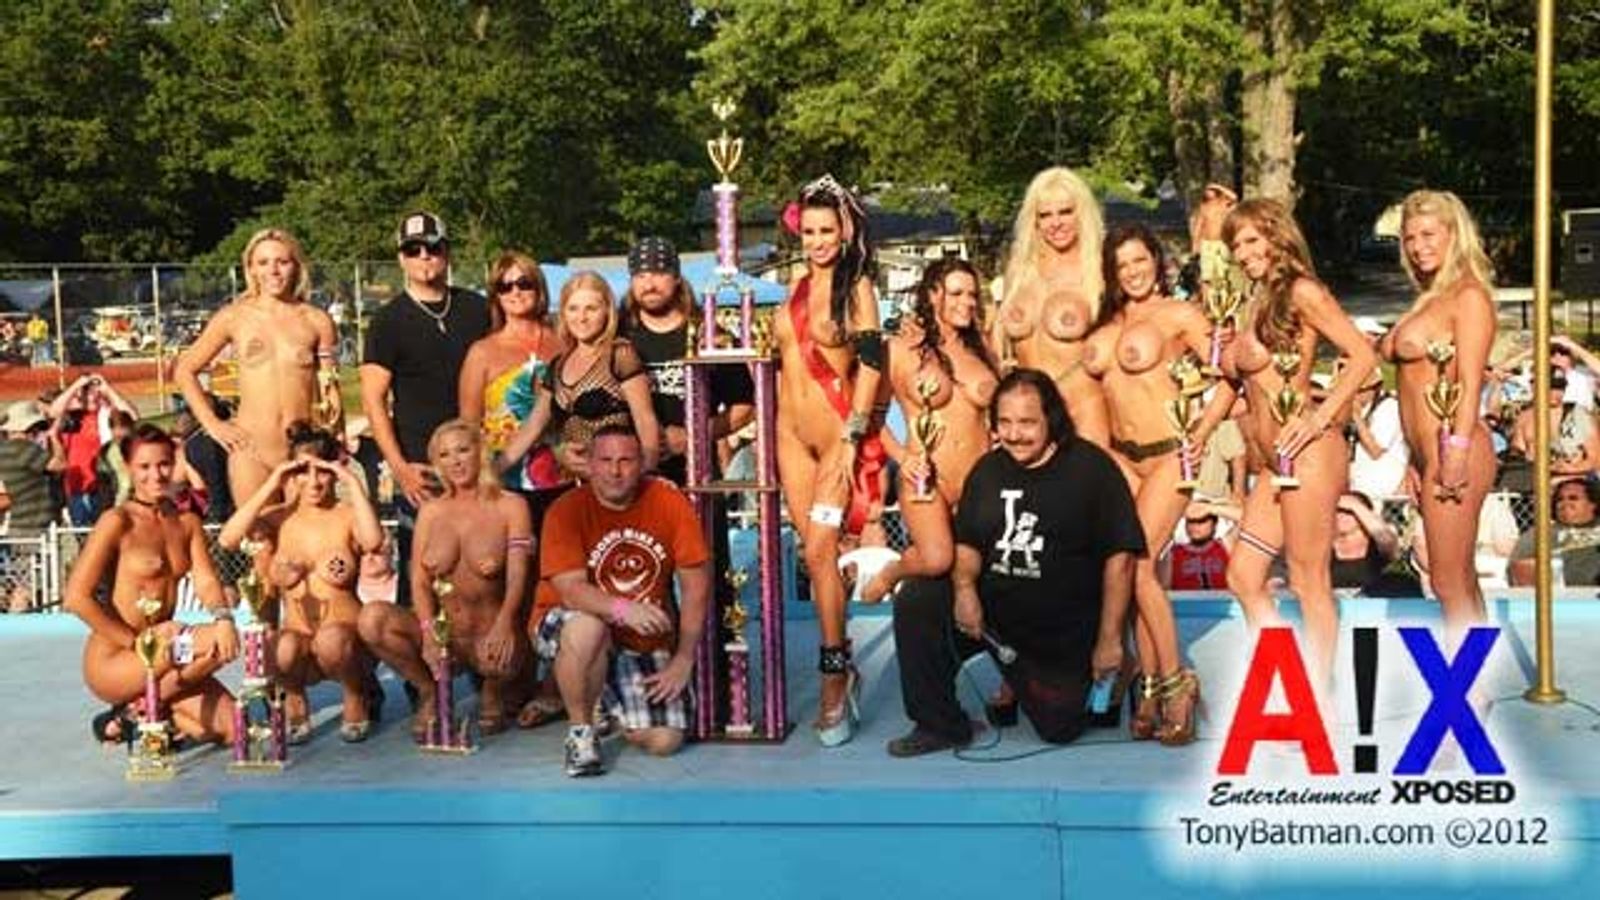 Tony Batman Hosts Nudes-A-Poppin’ This Weekend